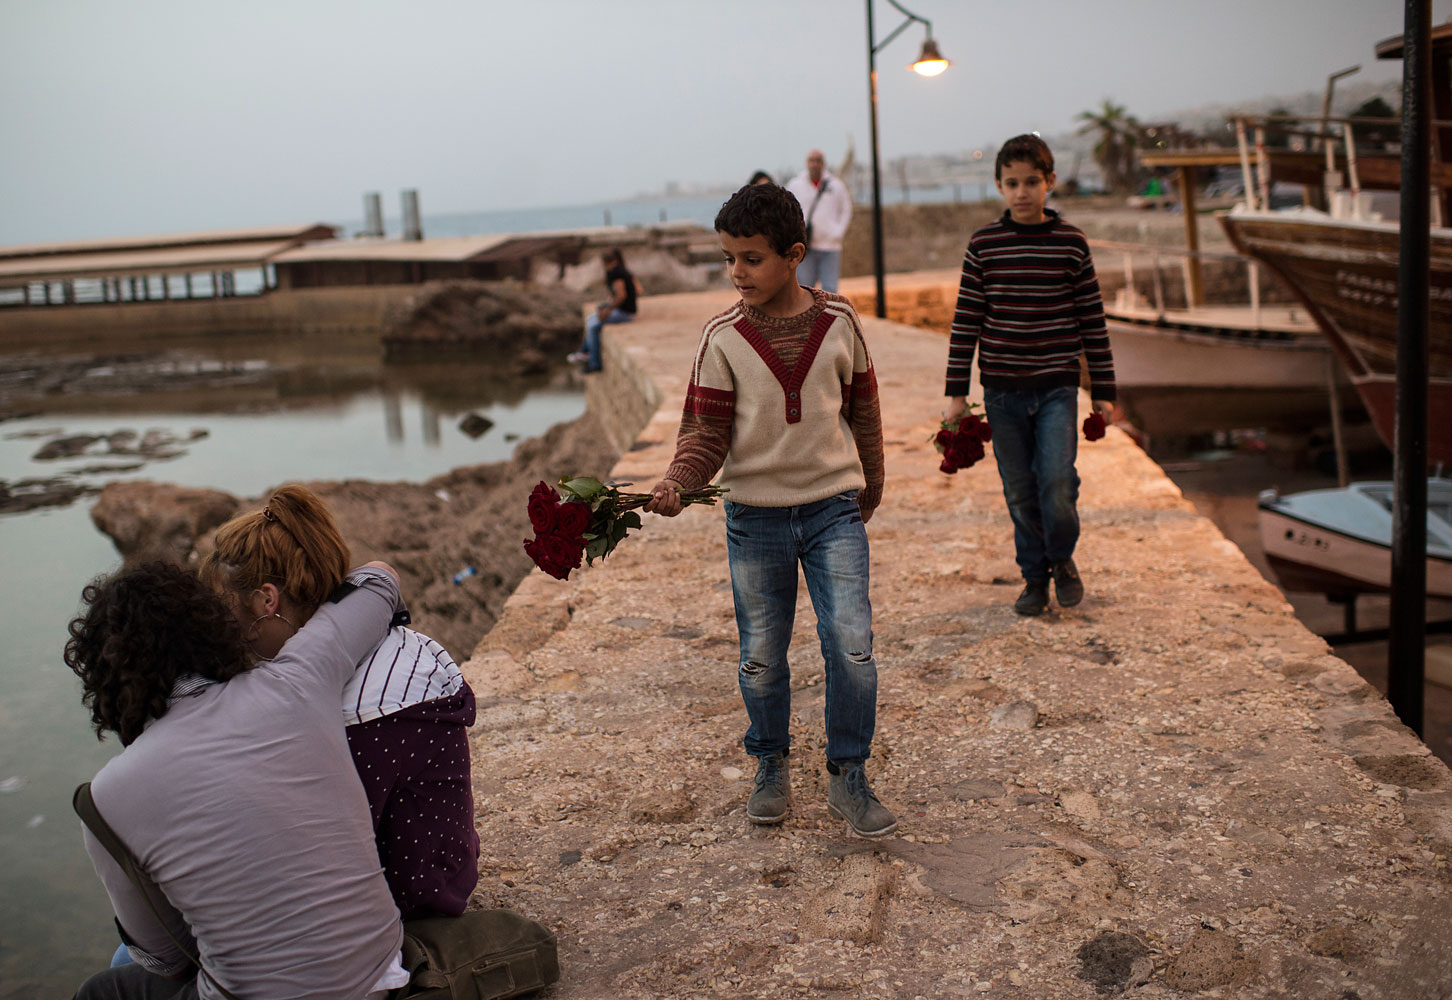 Manhal, aged nine, and Ahmed, 11, brothers from the northern Syrian city of Aleppo, sell flowers by the sea in Byblos. They go to school by day, and work all evening. Their older brother doesn’t go to school at all. “I would if I could,” says Mohammed. “But who would help my father with the rent?”